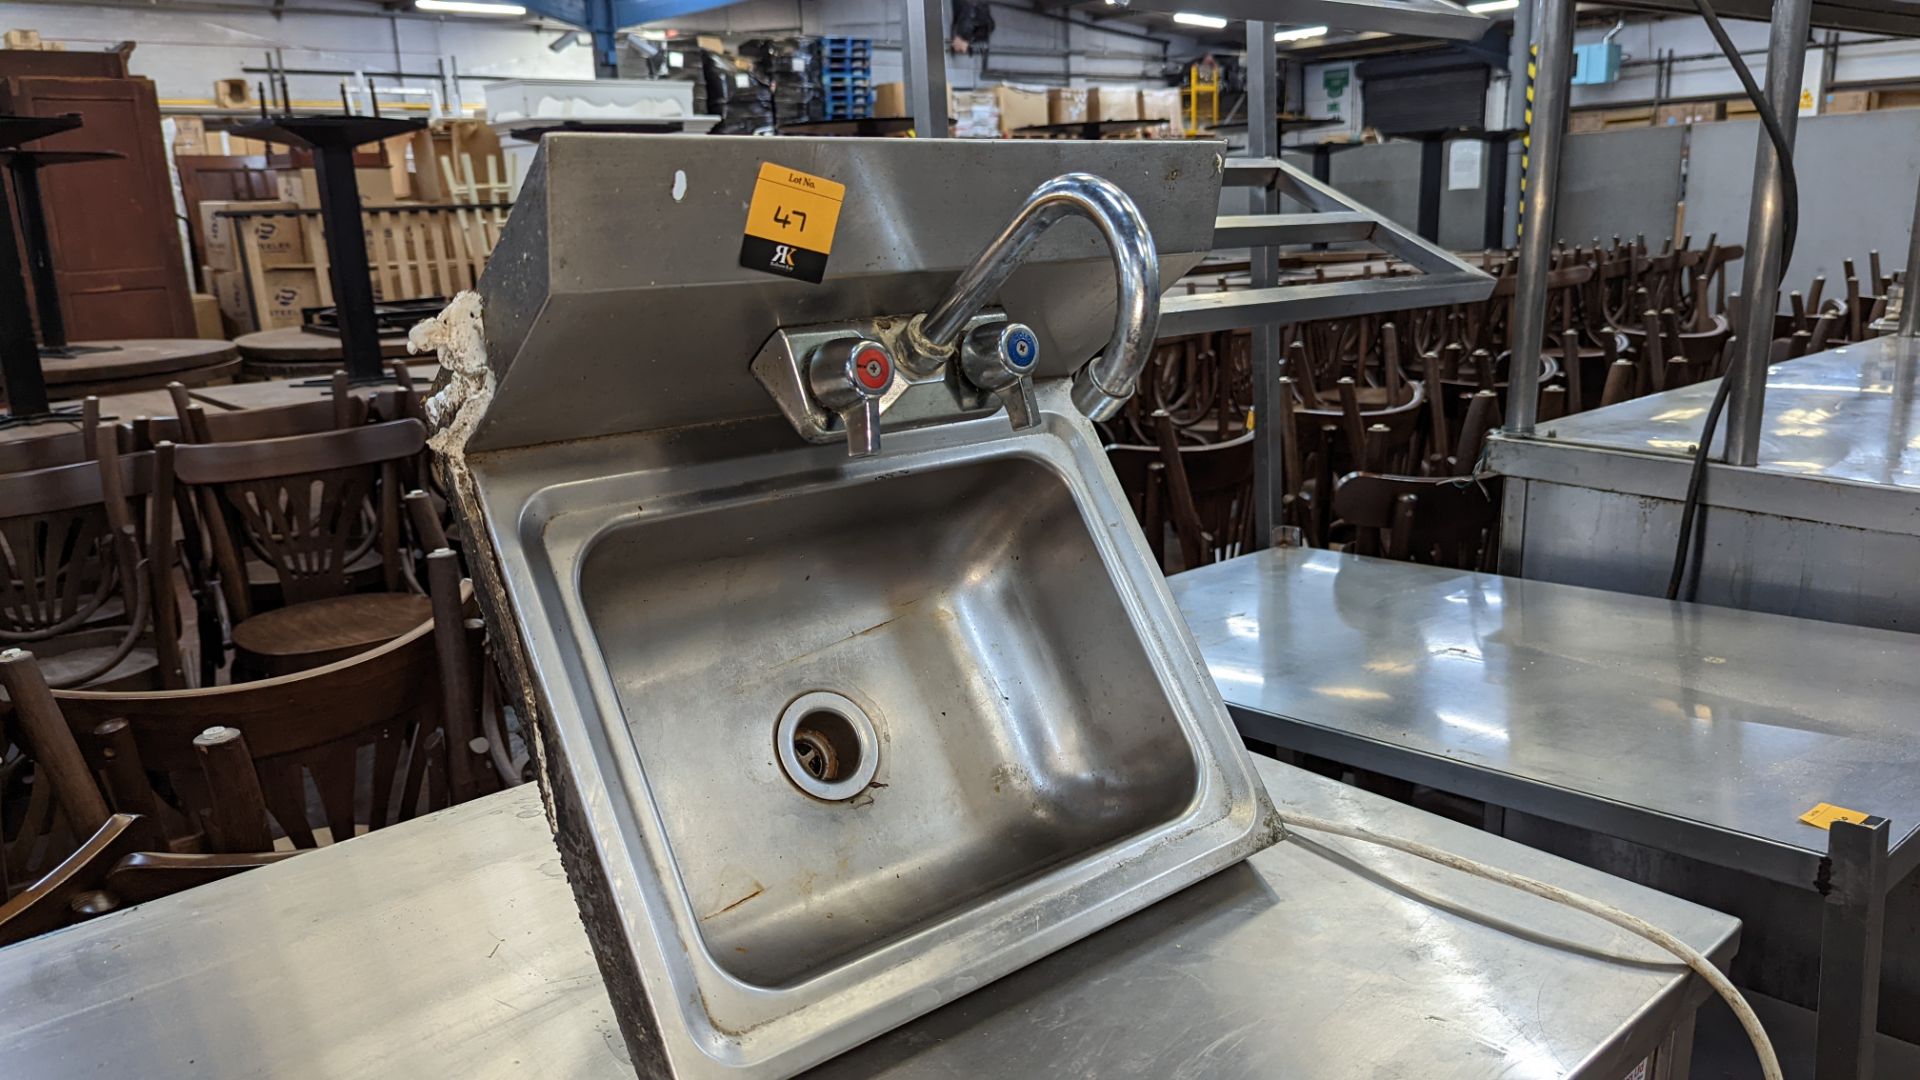 Stainless steel handwashing basin with taps - Image 3 of 3